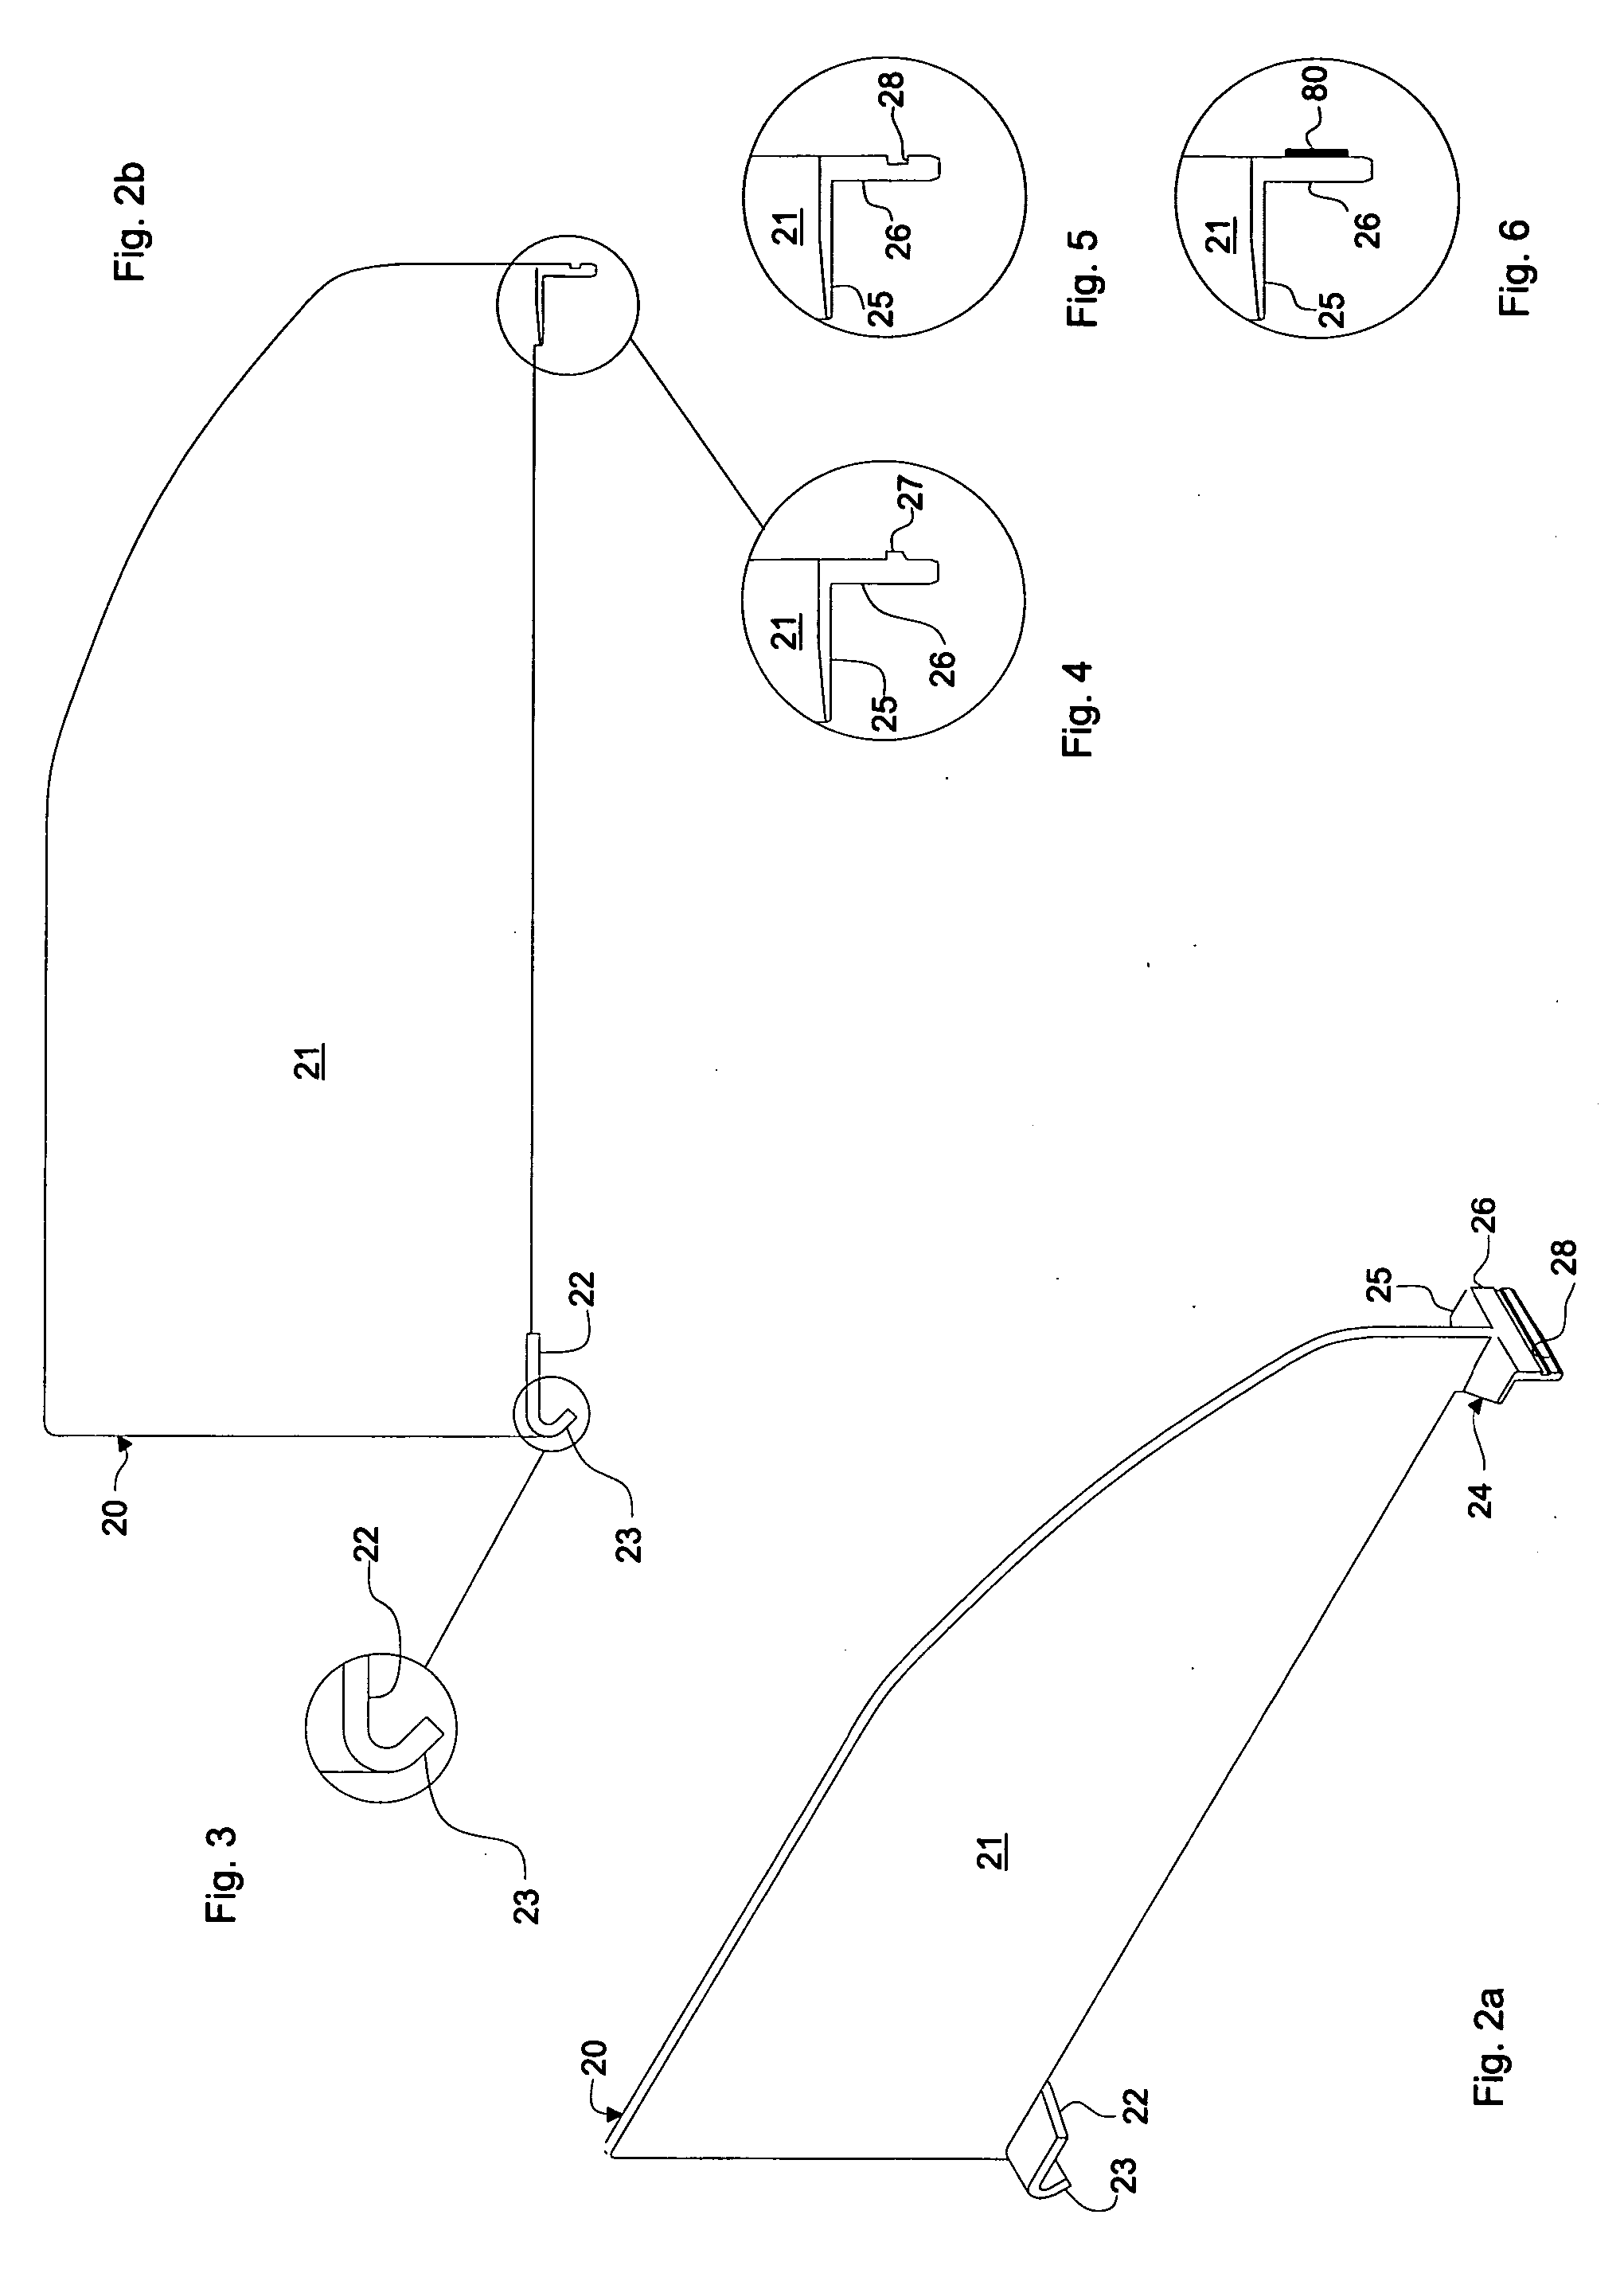 System for attaching accessories to a shelf